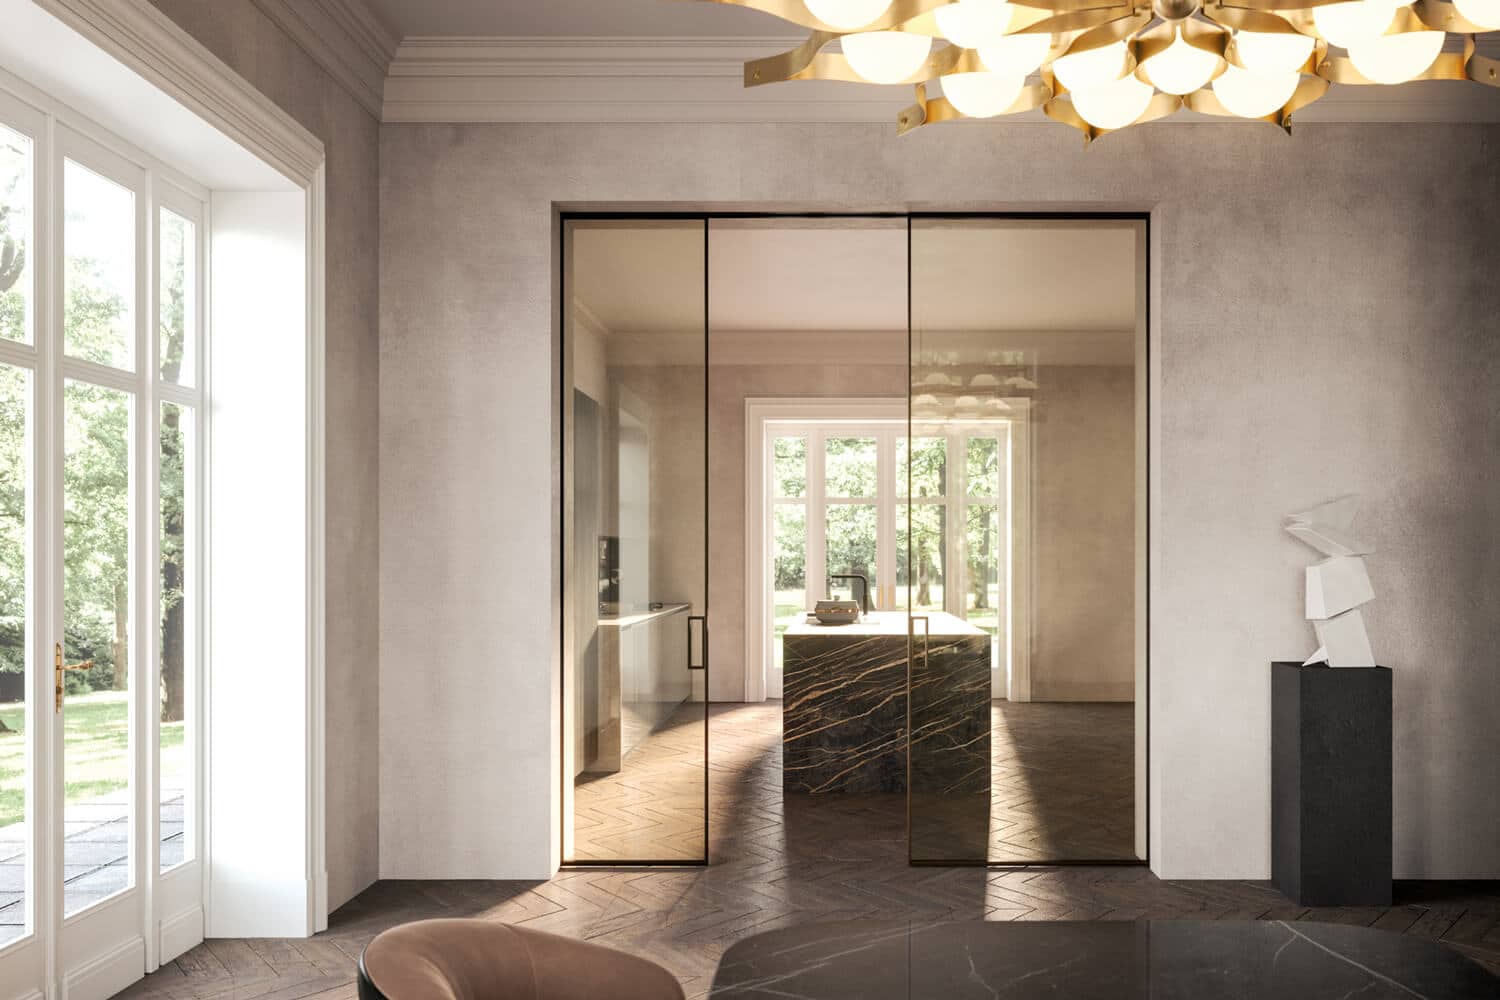 Elegant. Essential. Frameless clear glass sliding doors disappearing into the wall. Square handle. 